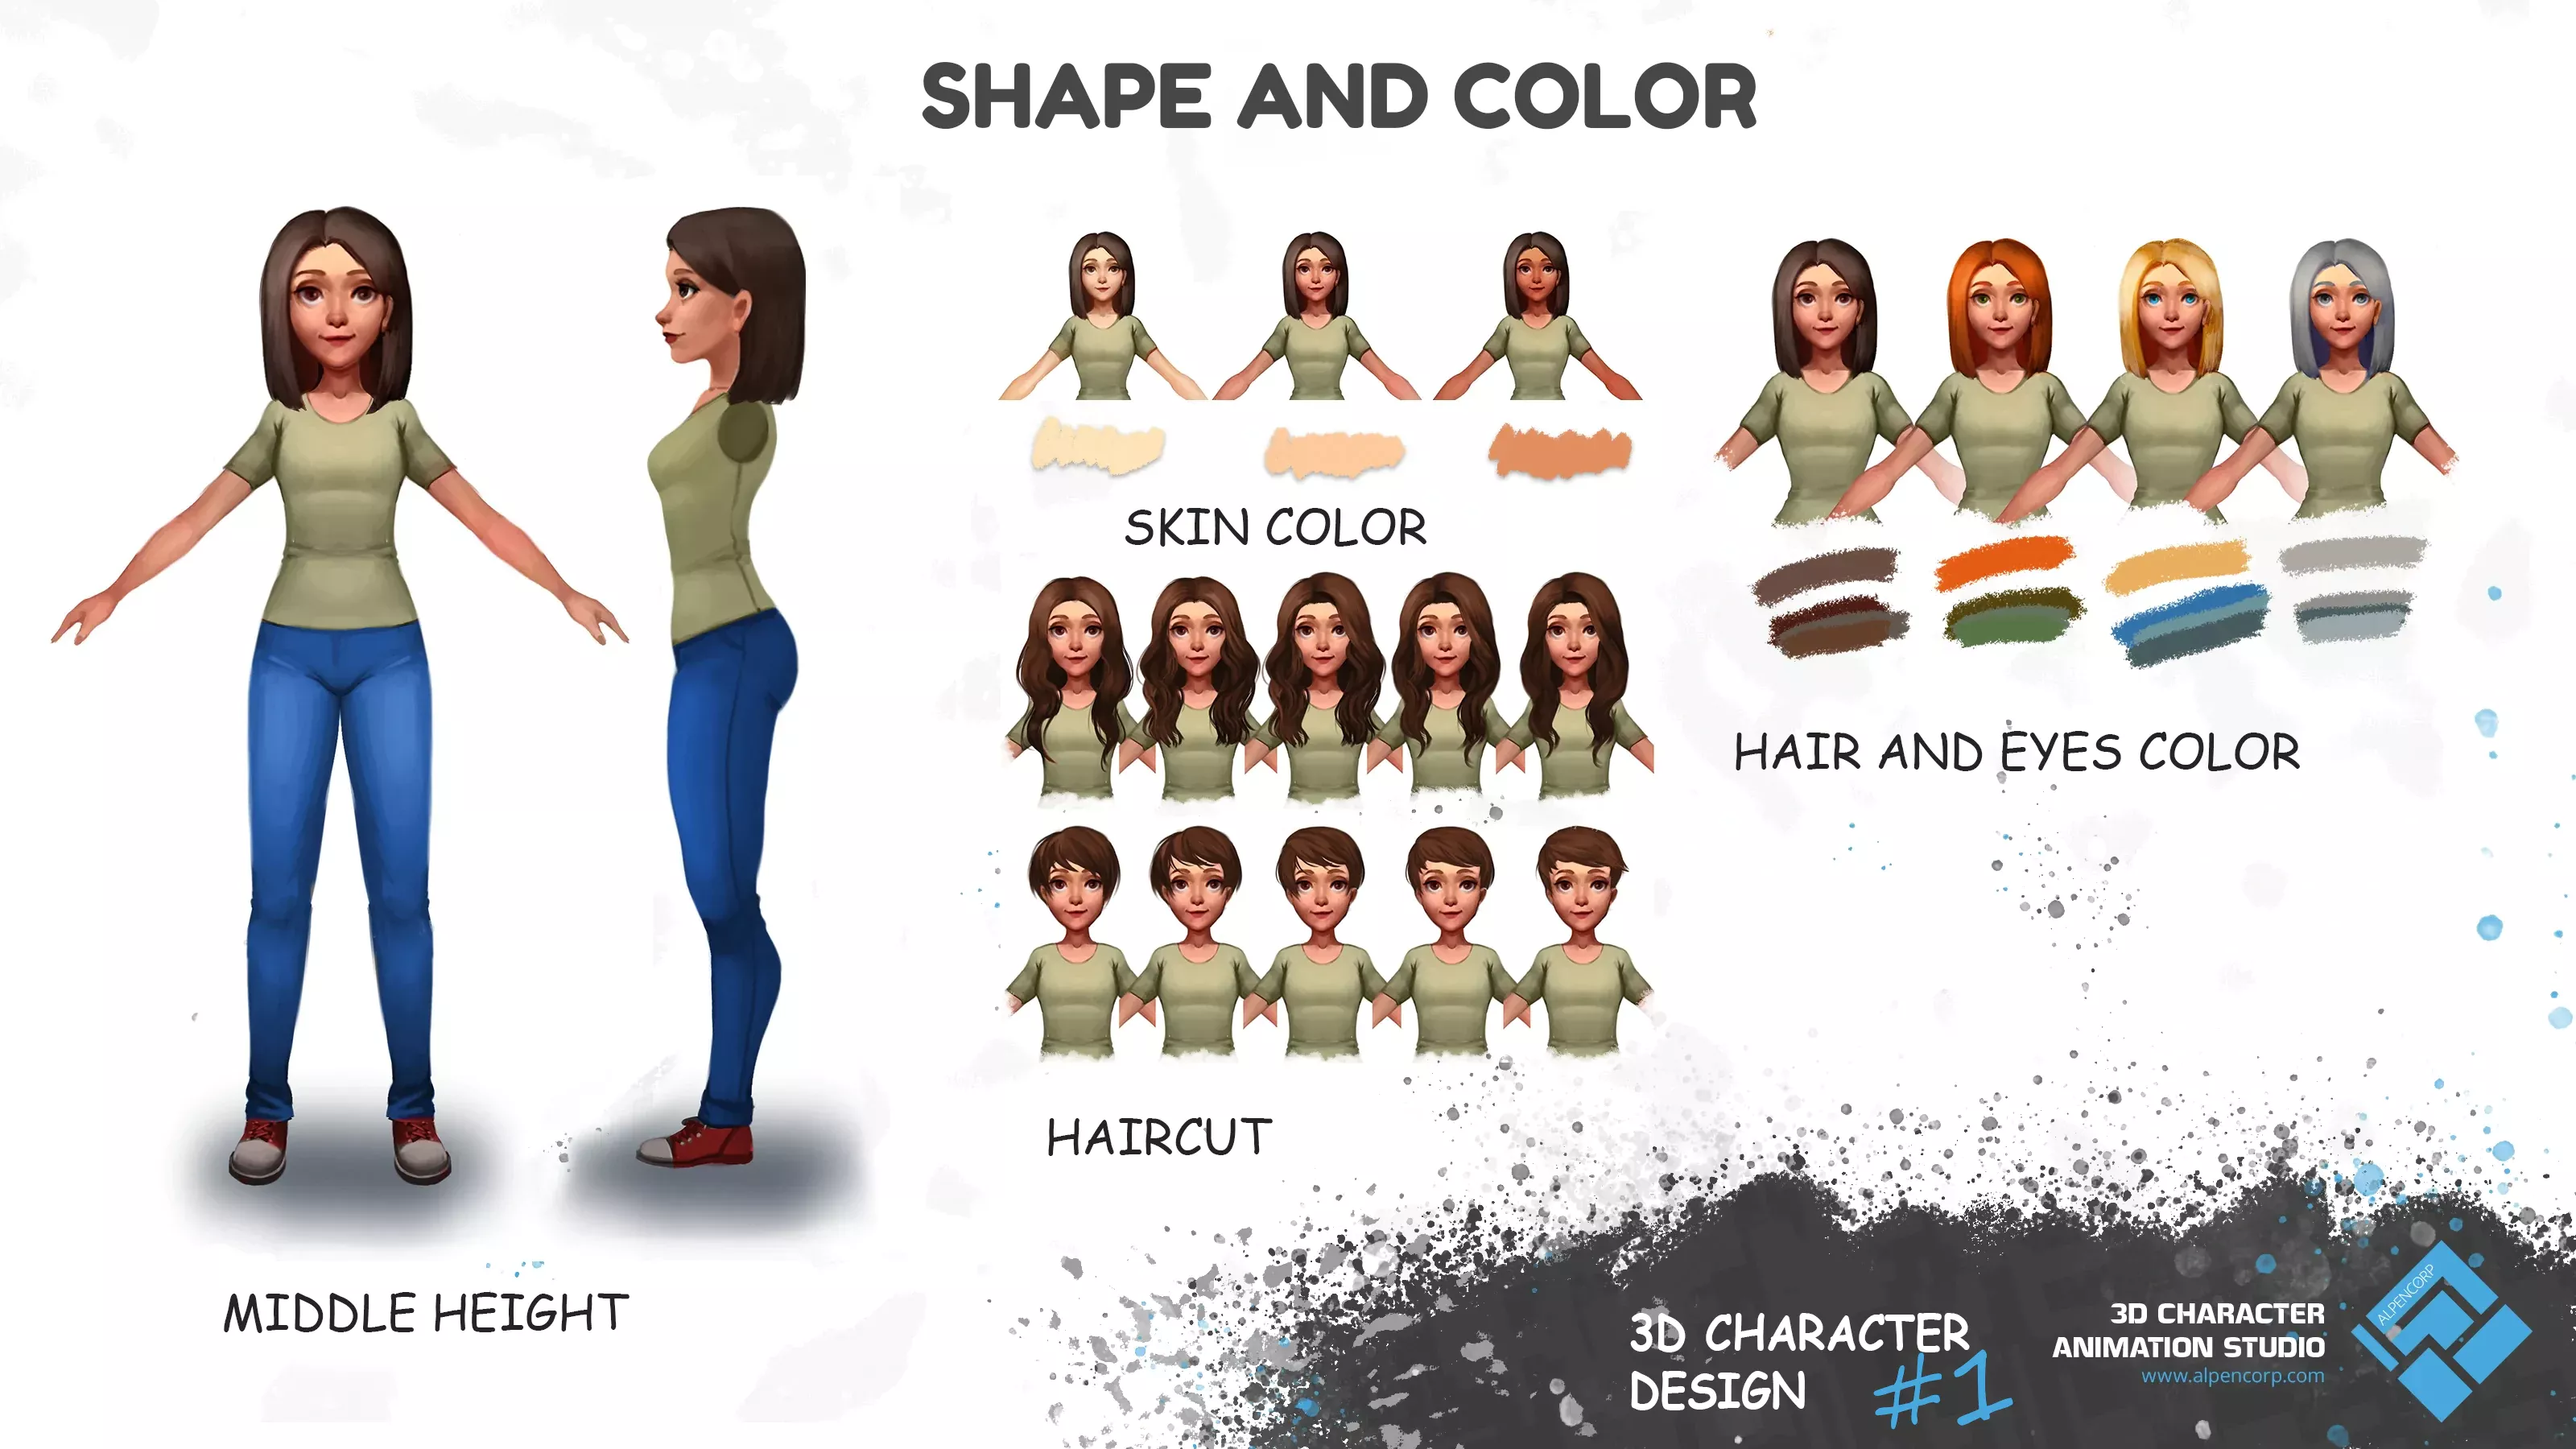 The concept 3D character for eShop full face and profile views, as well as color variations and haircuts.